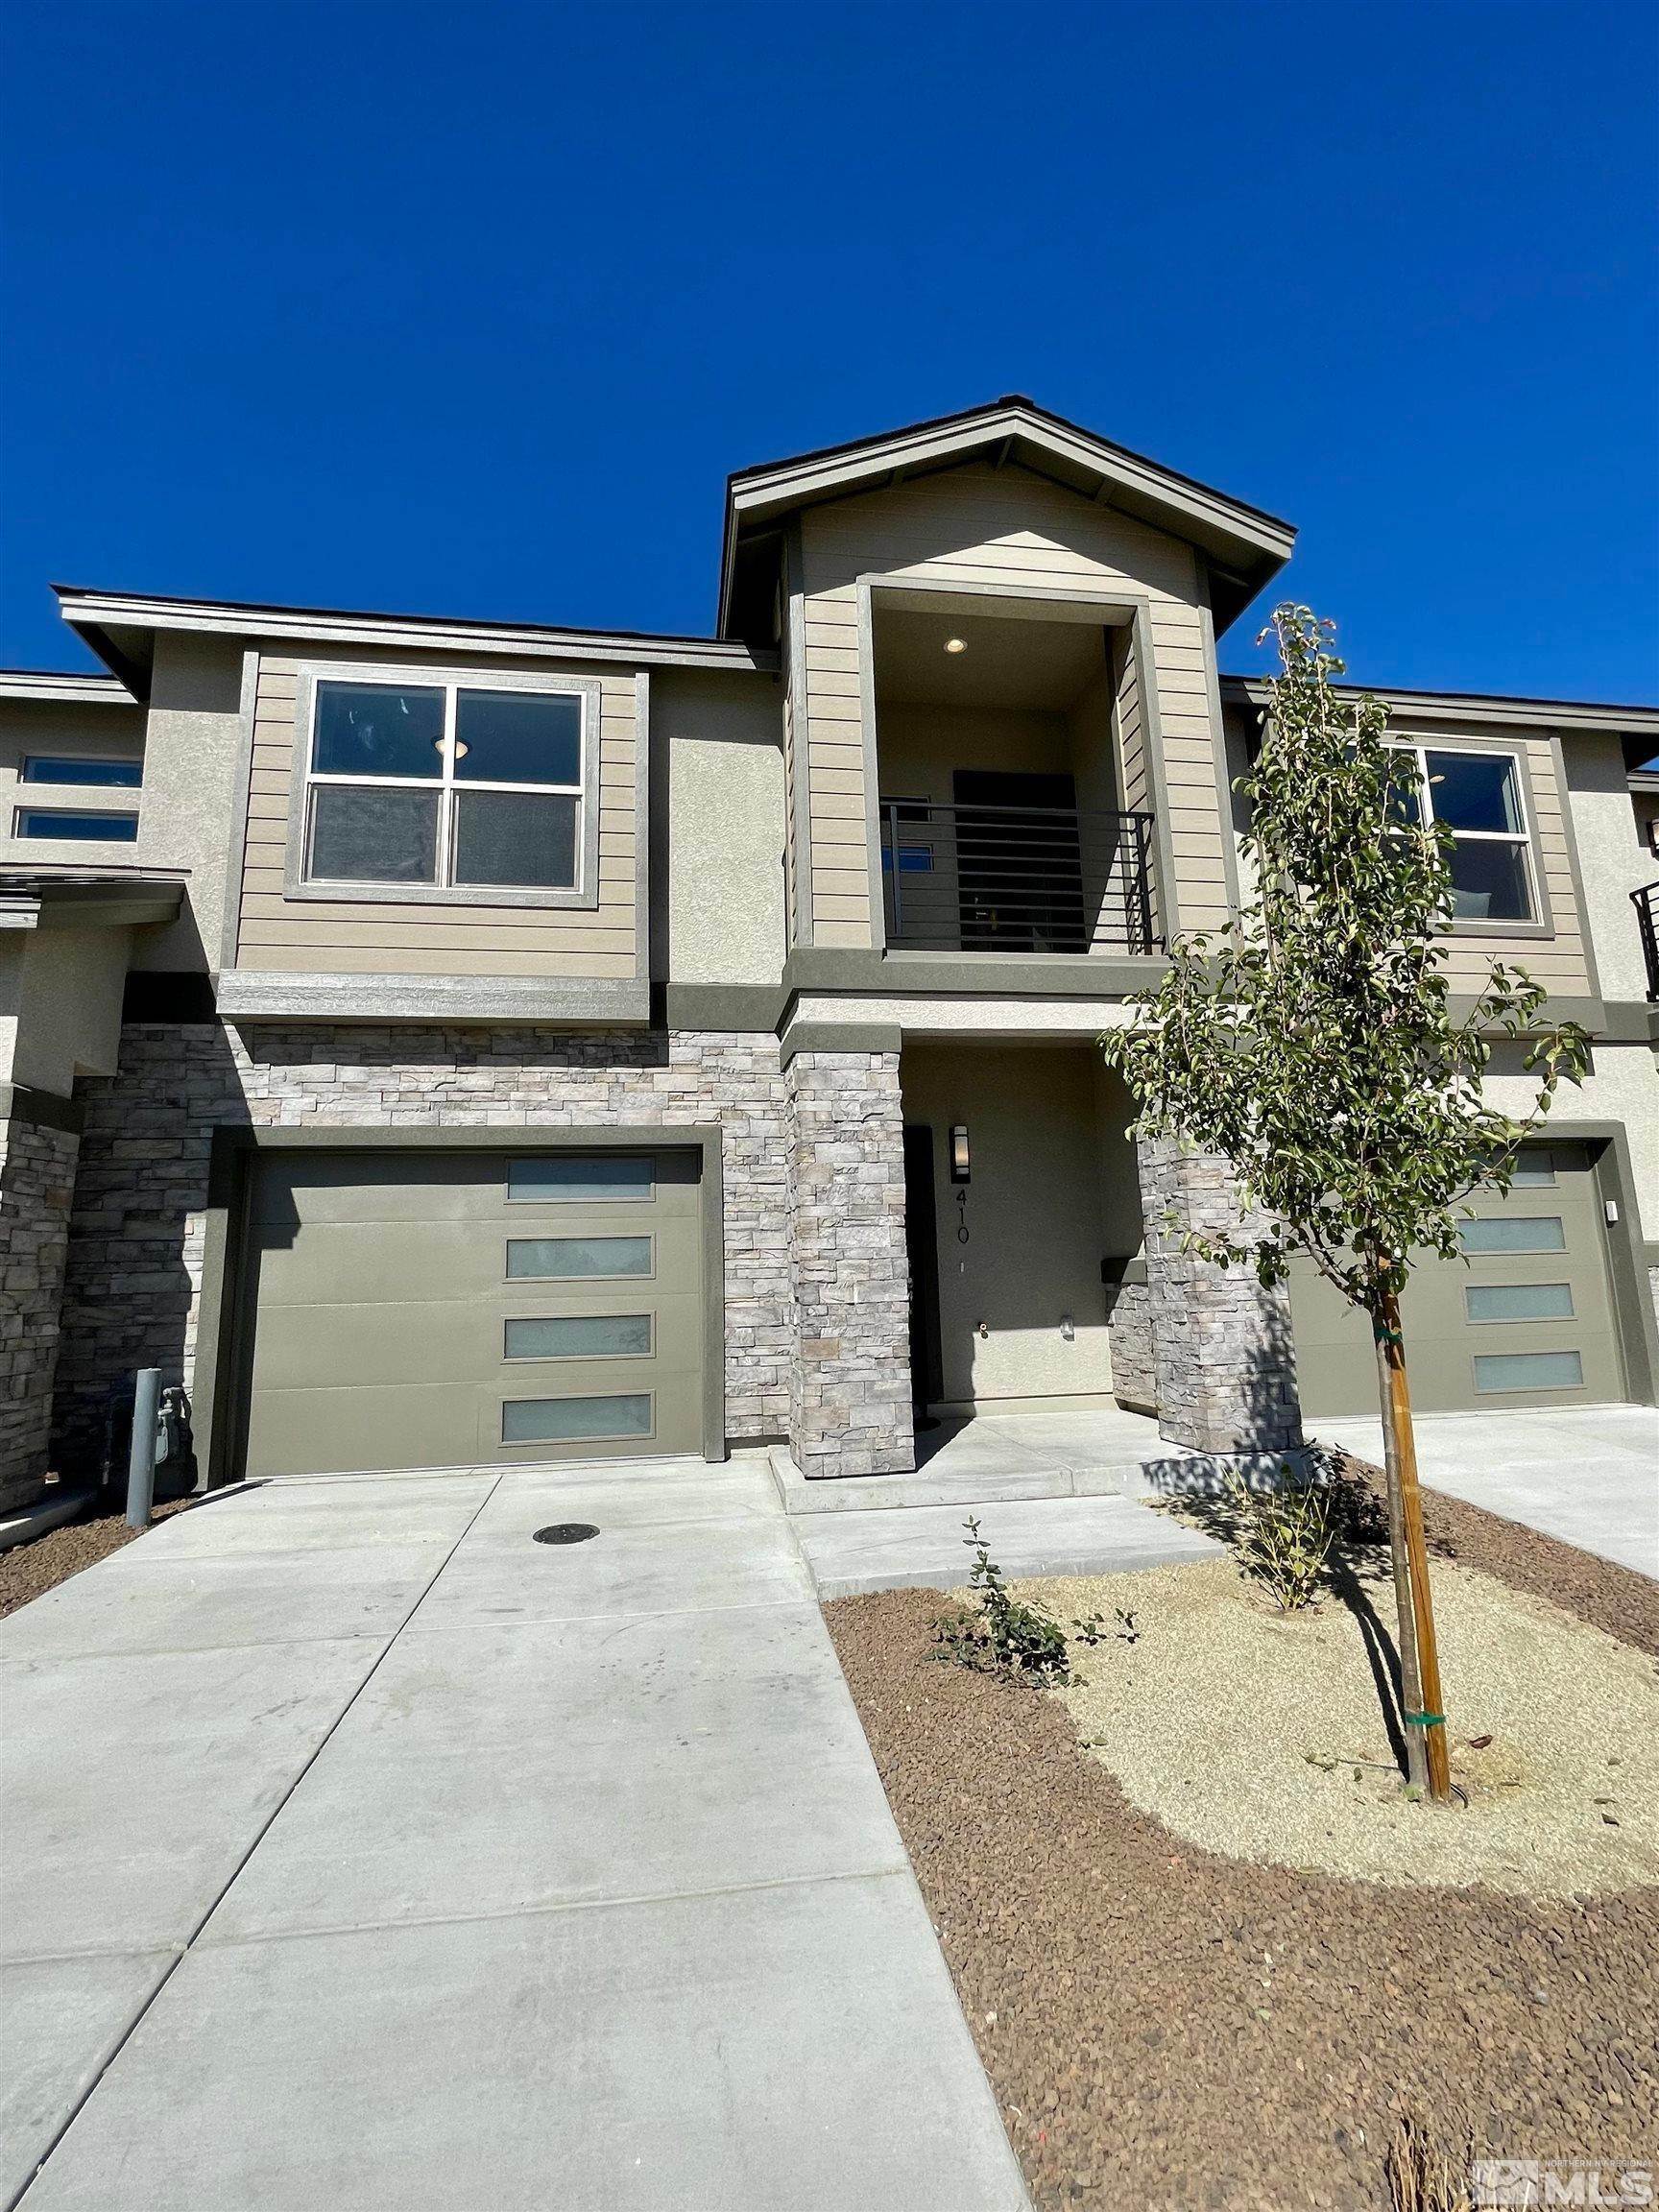 Condo / Townhouse for Active at 410 Dublin Street Carson City, Nevada 89701 United States